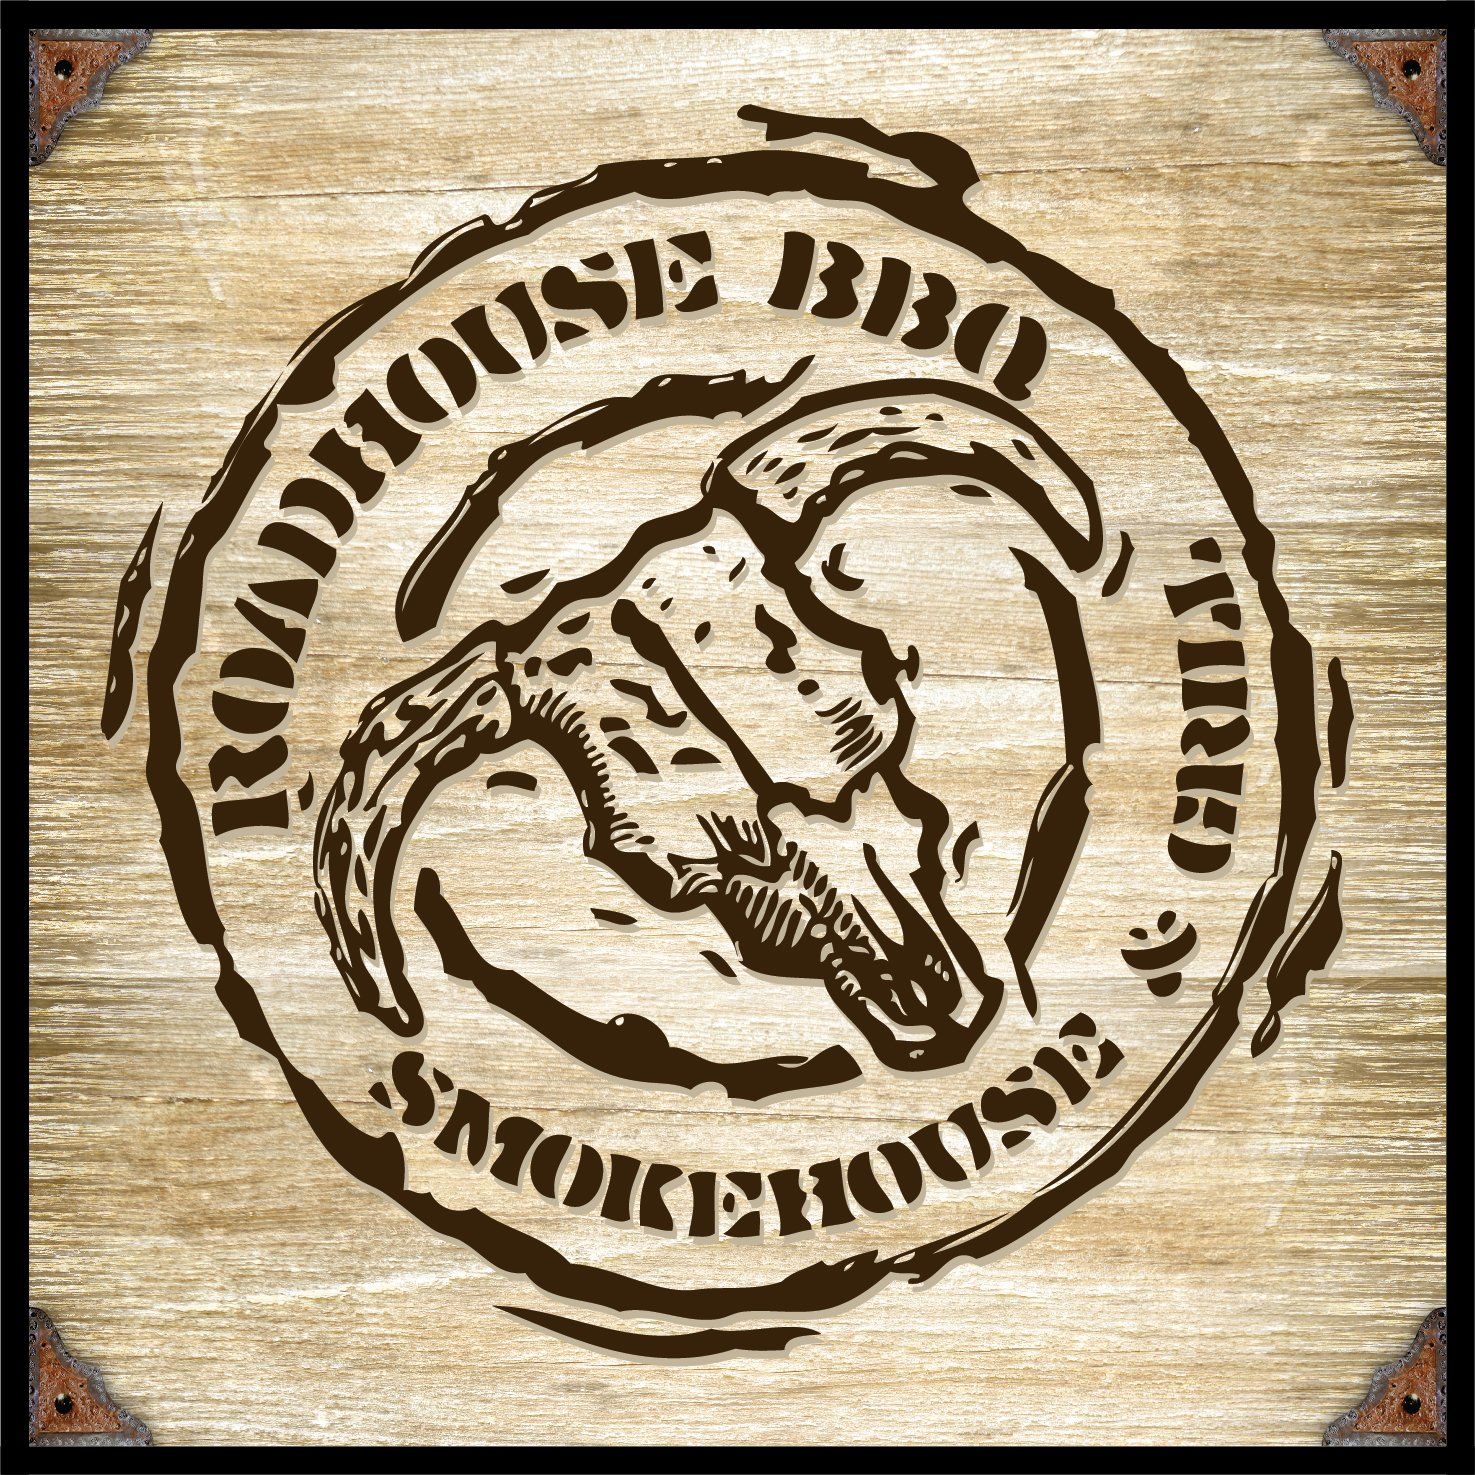 The logo for roadhouse bbq smokehouse is on a wooden barrel.